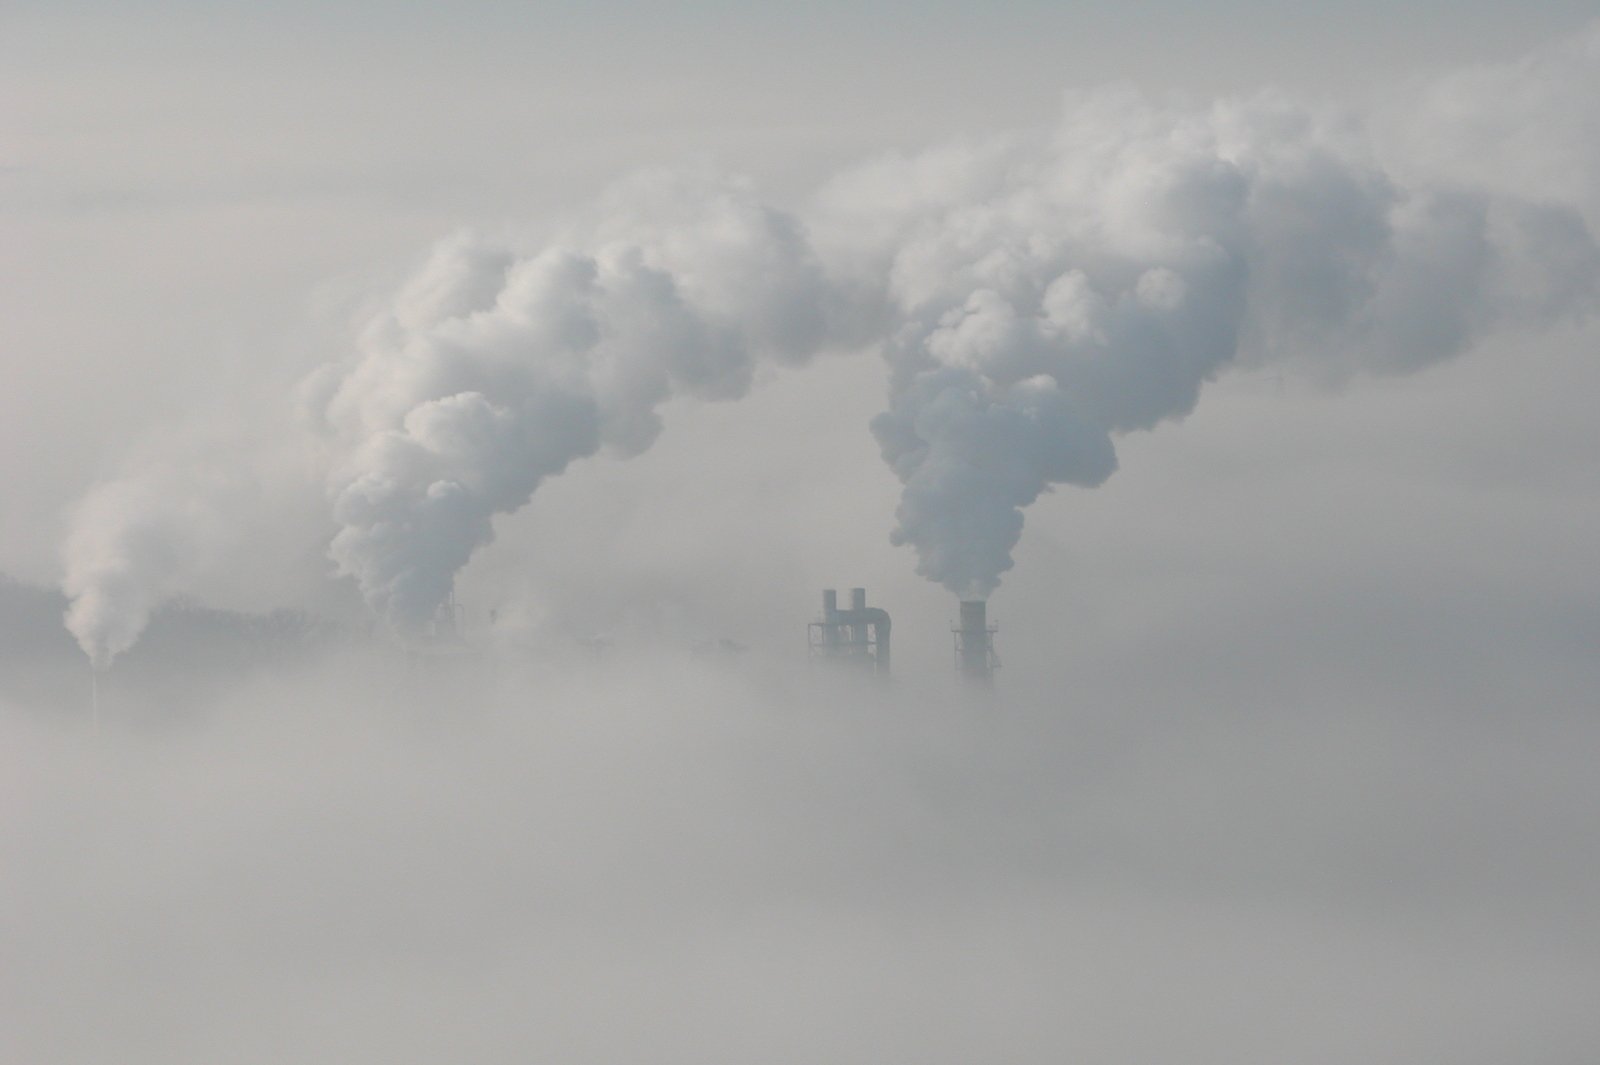 smoke stacks from industrial smokestacks rise above clouds in the sky